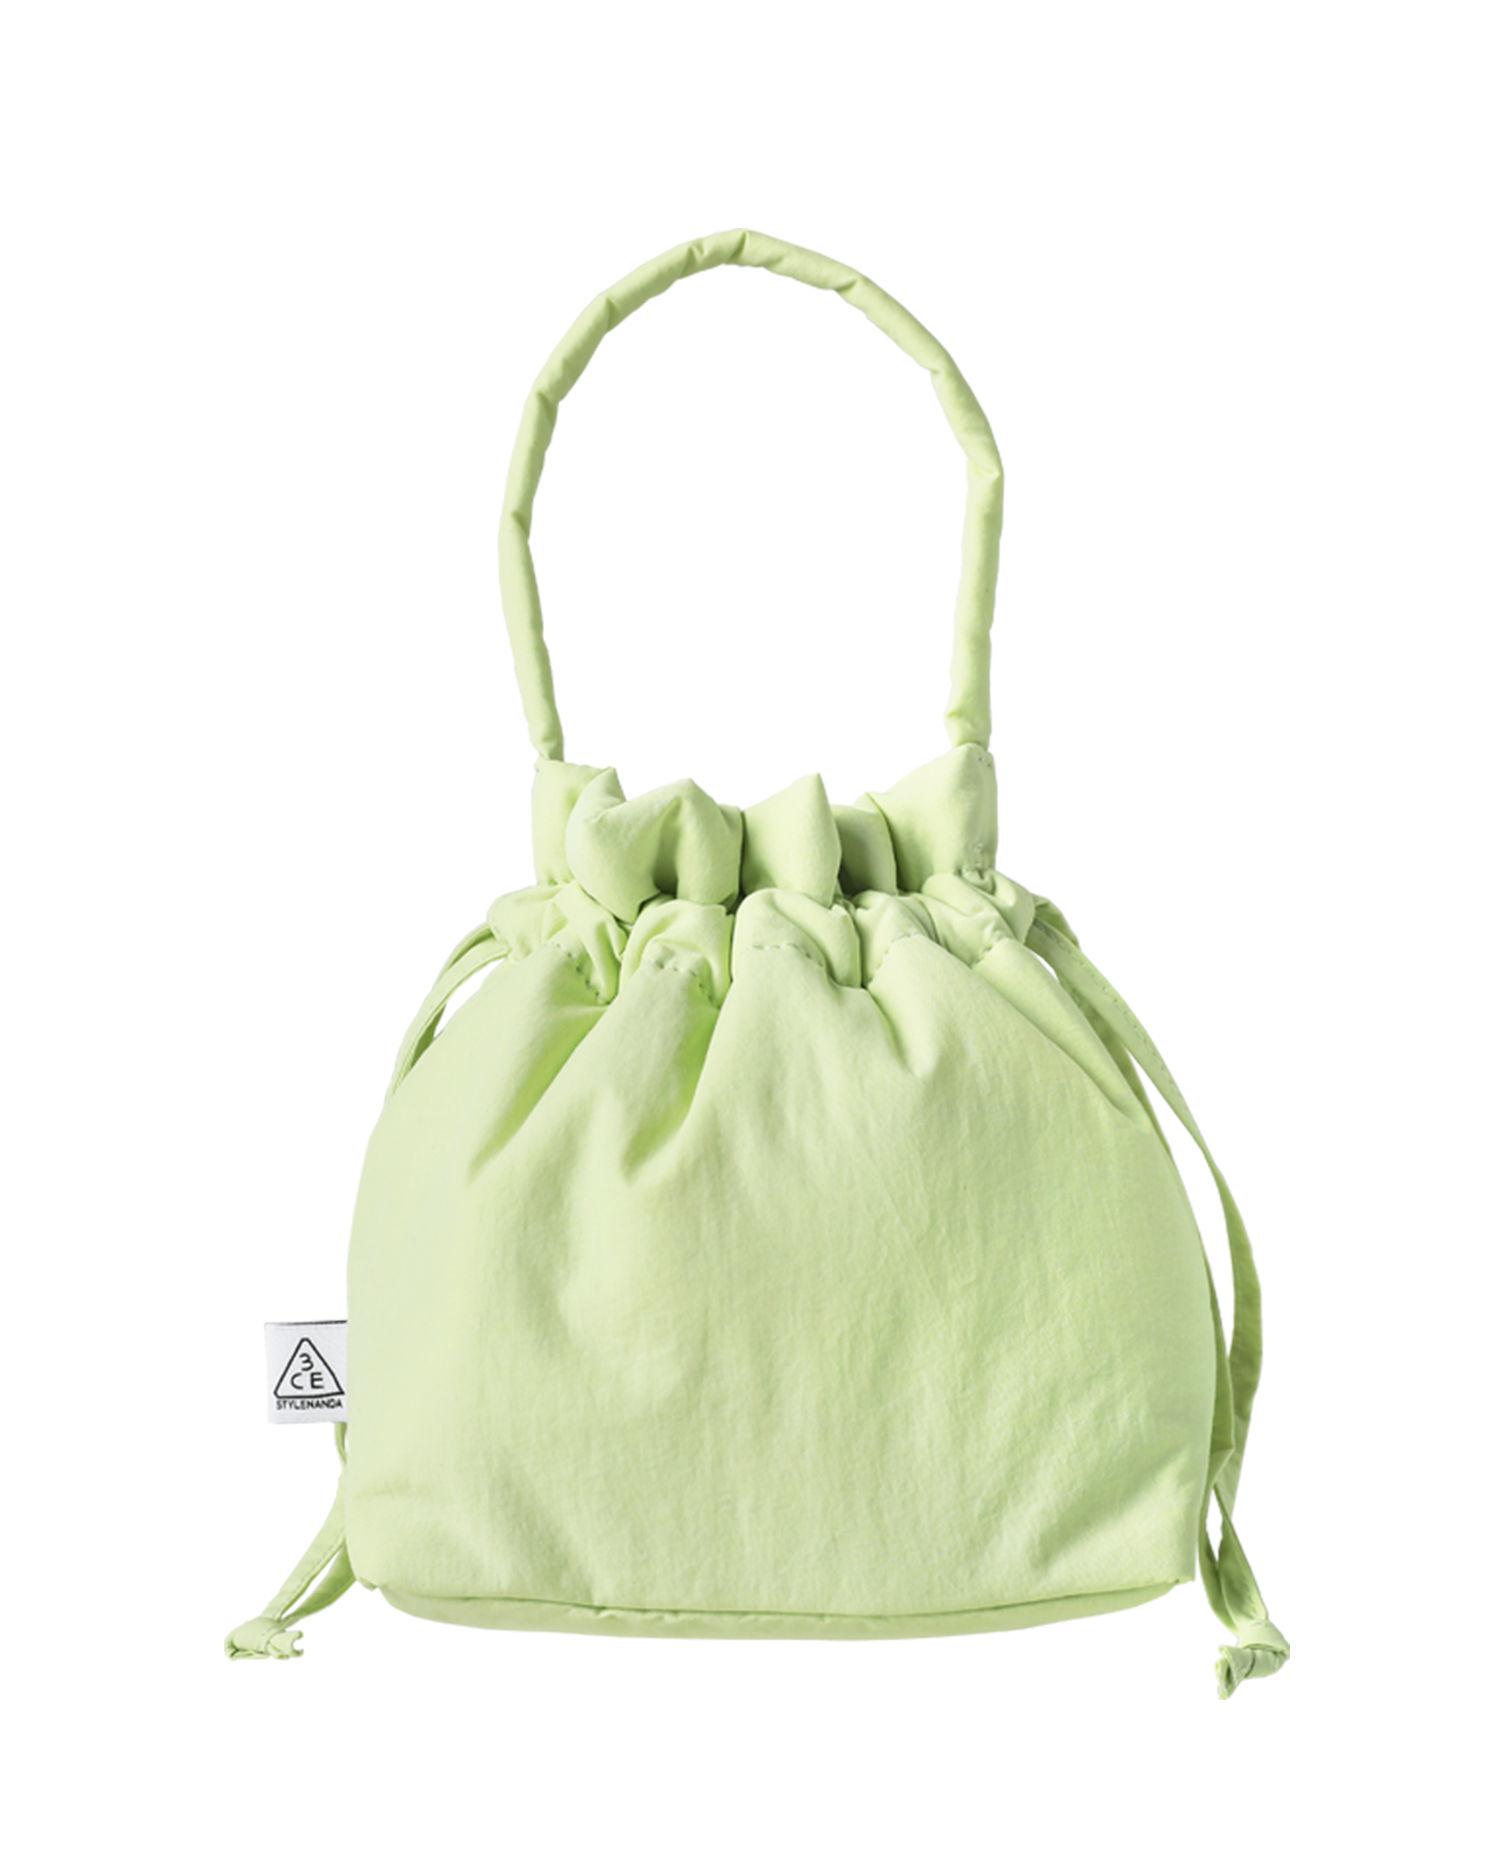 Padded bucket bag #Apple Green by 3CE